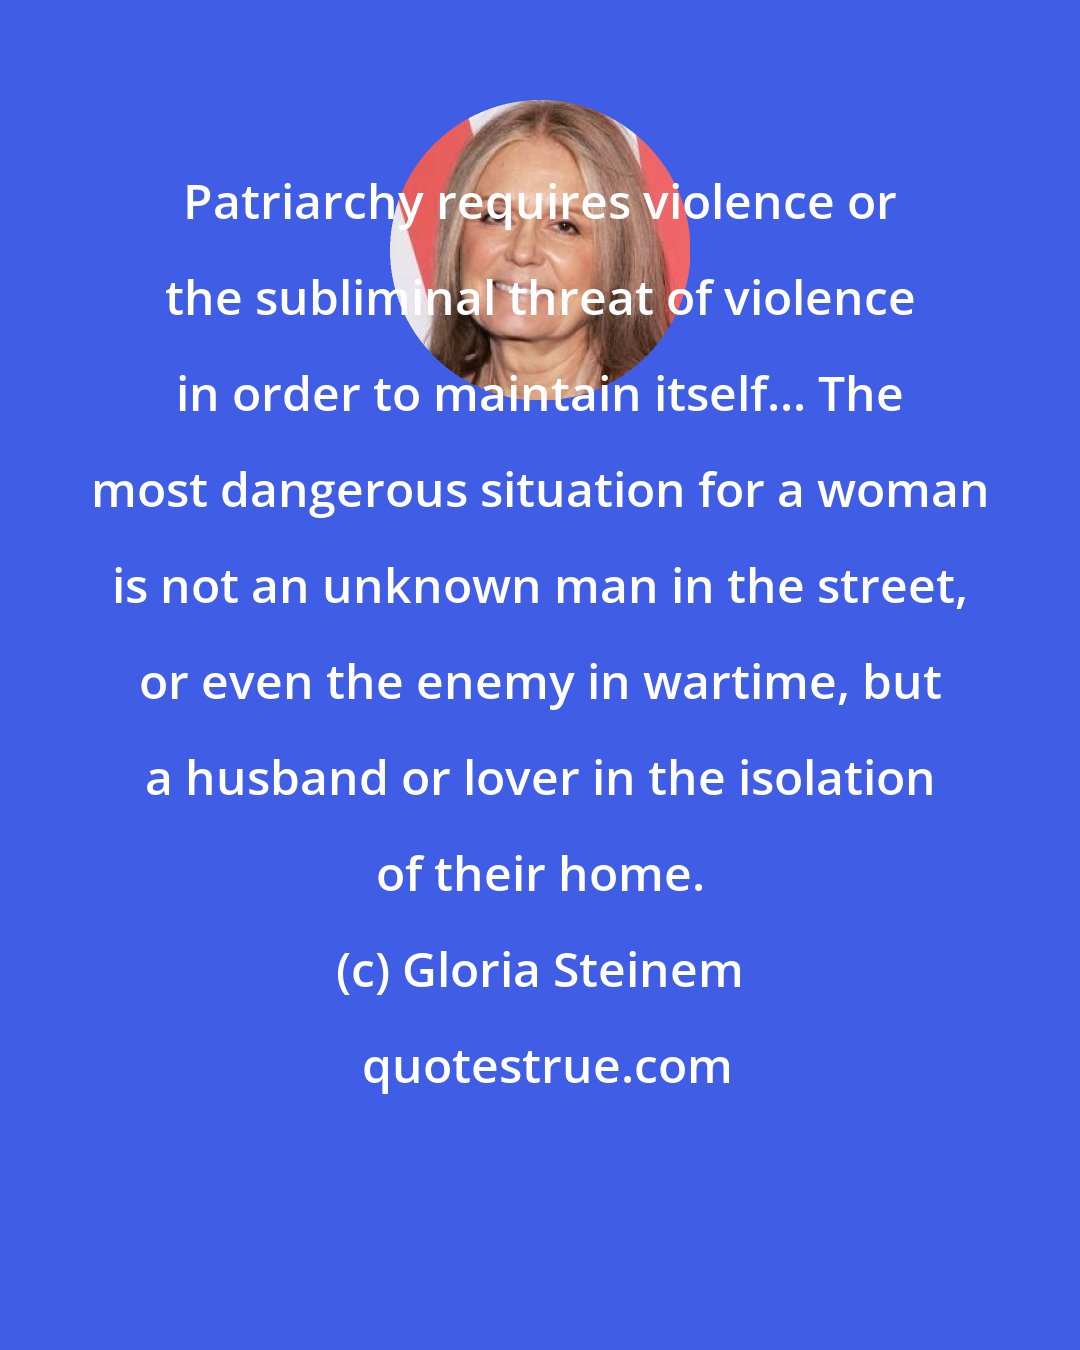 Gloria Steinem: Patriarchy requires violence or the subliminal threat of violence in order to maintain itself... The most dangerous situation for a woman is not an unknown man in the street, or even the enemy in wartime, but a husband or lover in the isolation of their home.